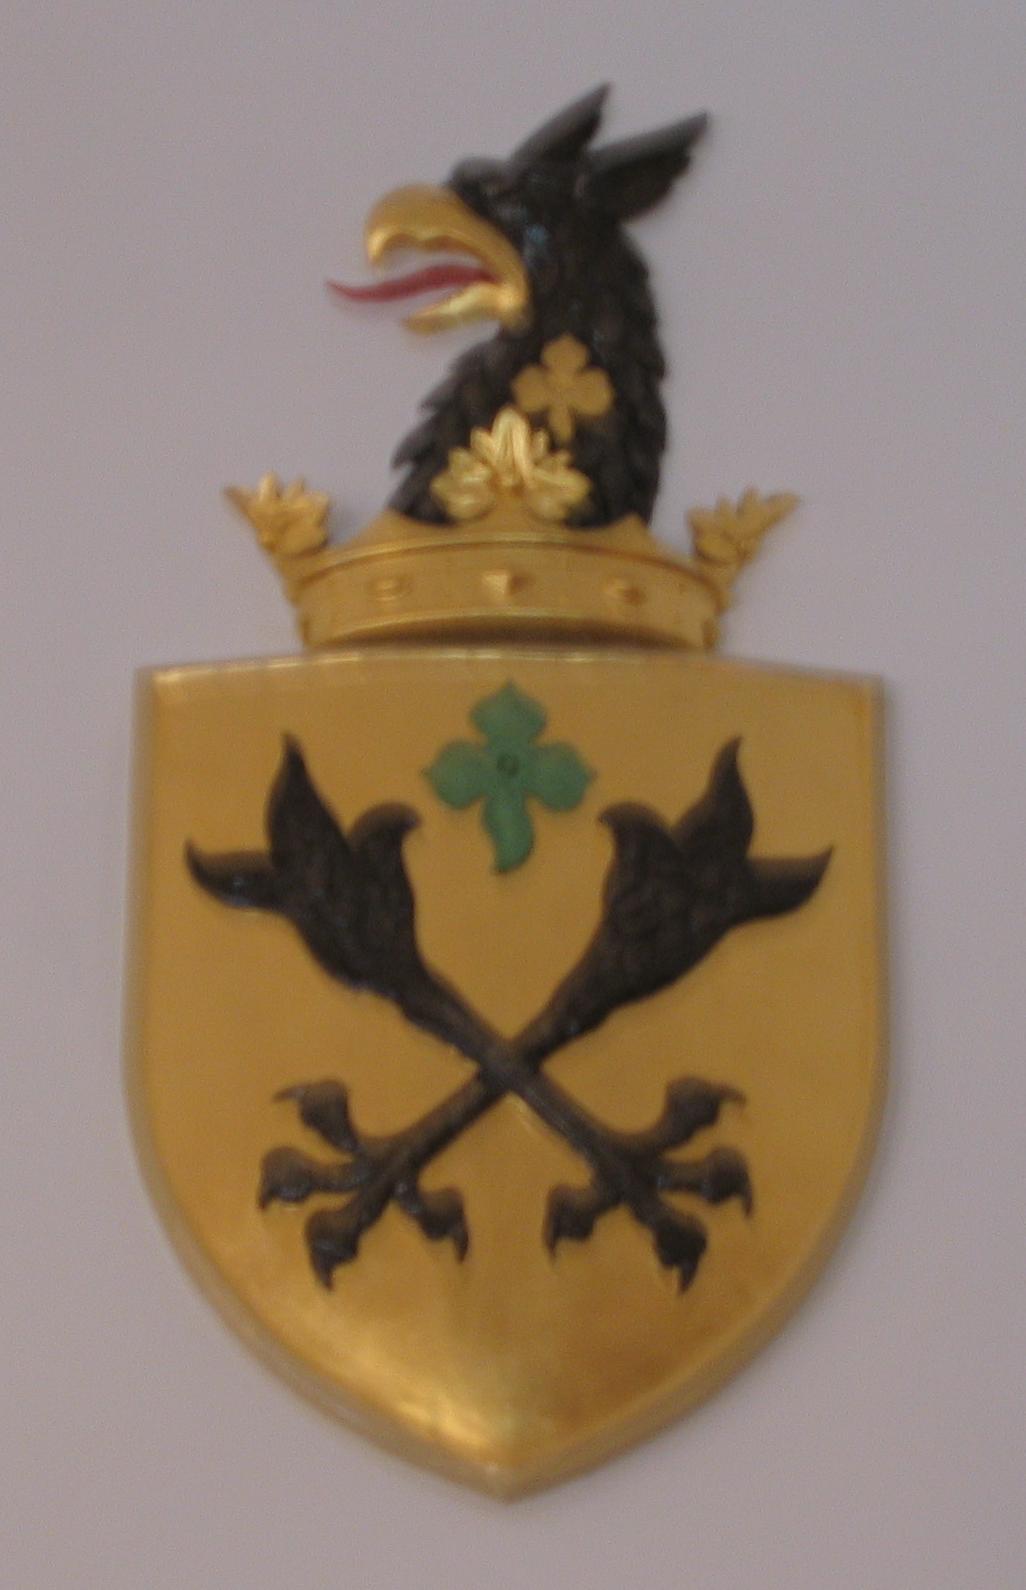 The Crest which is on display at Brewers' Hall, London